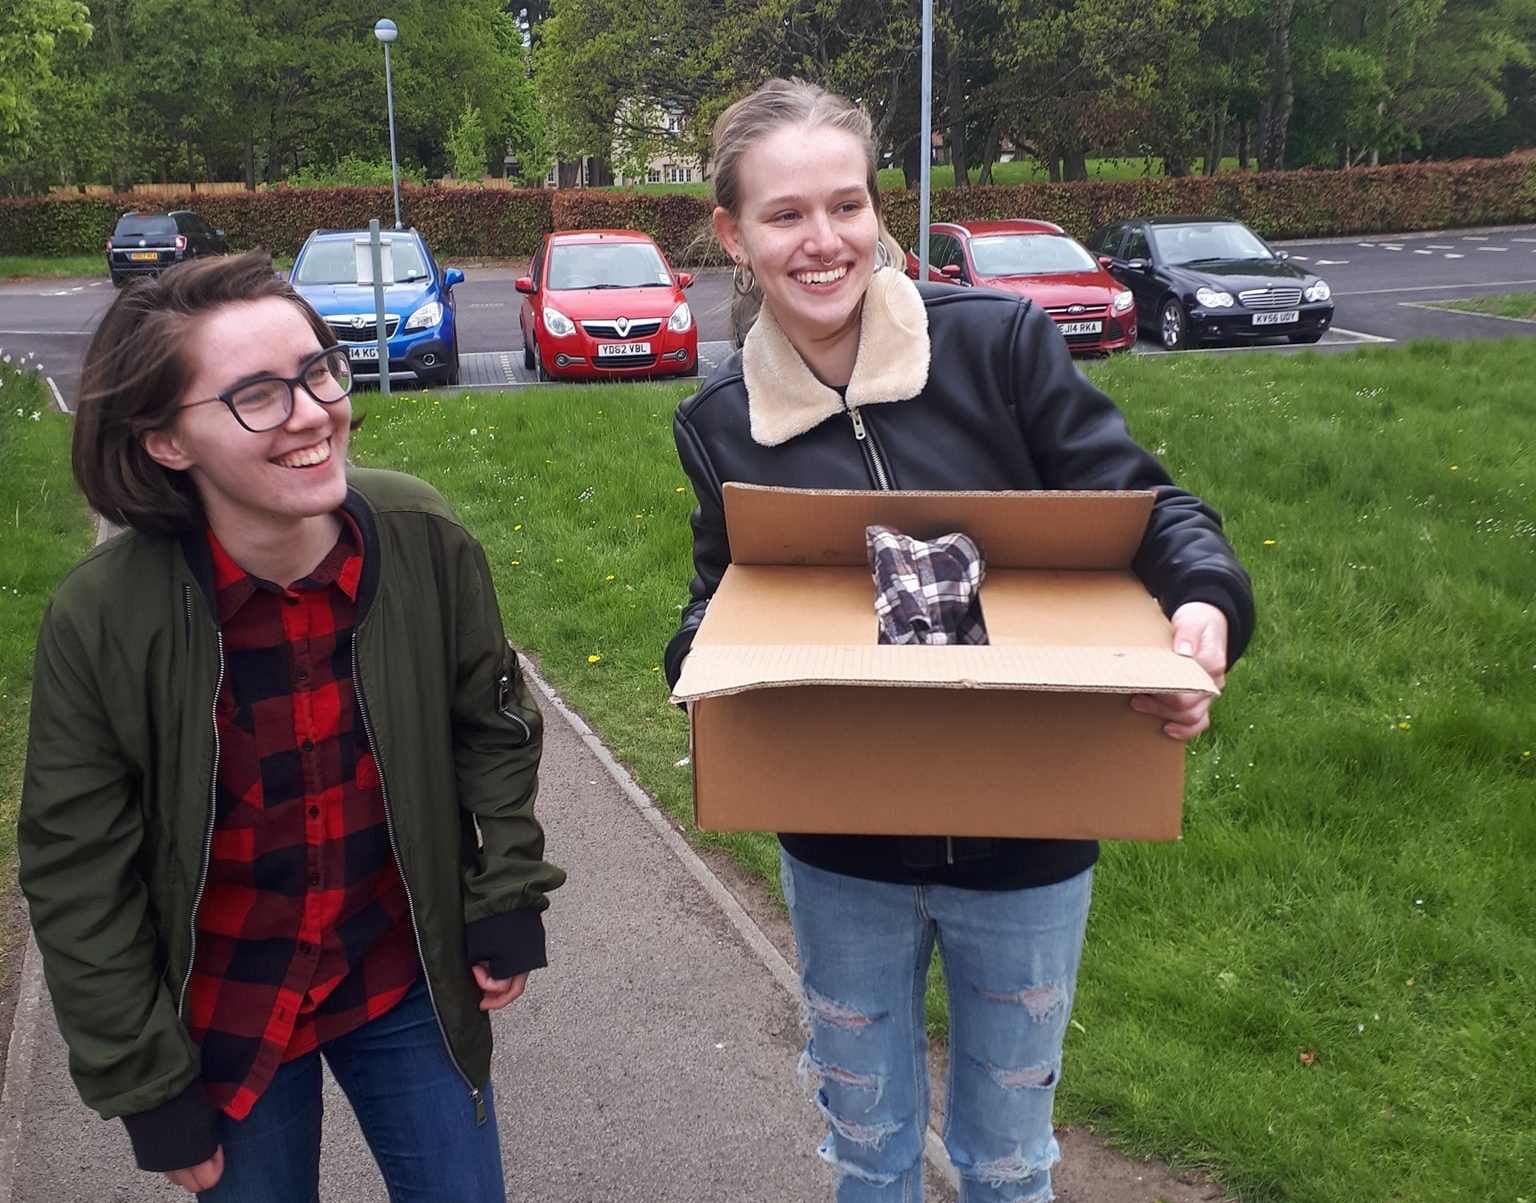 Erin (left) and Katy carry the duck in a box © John Fettes